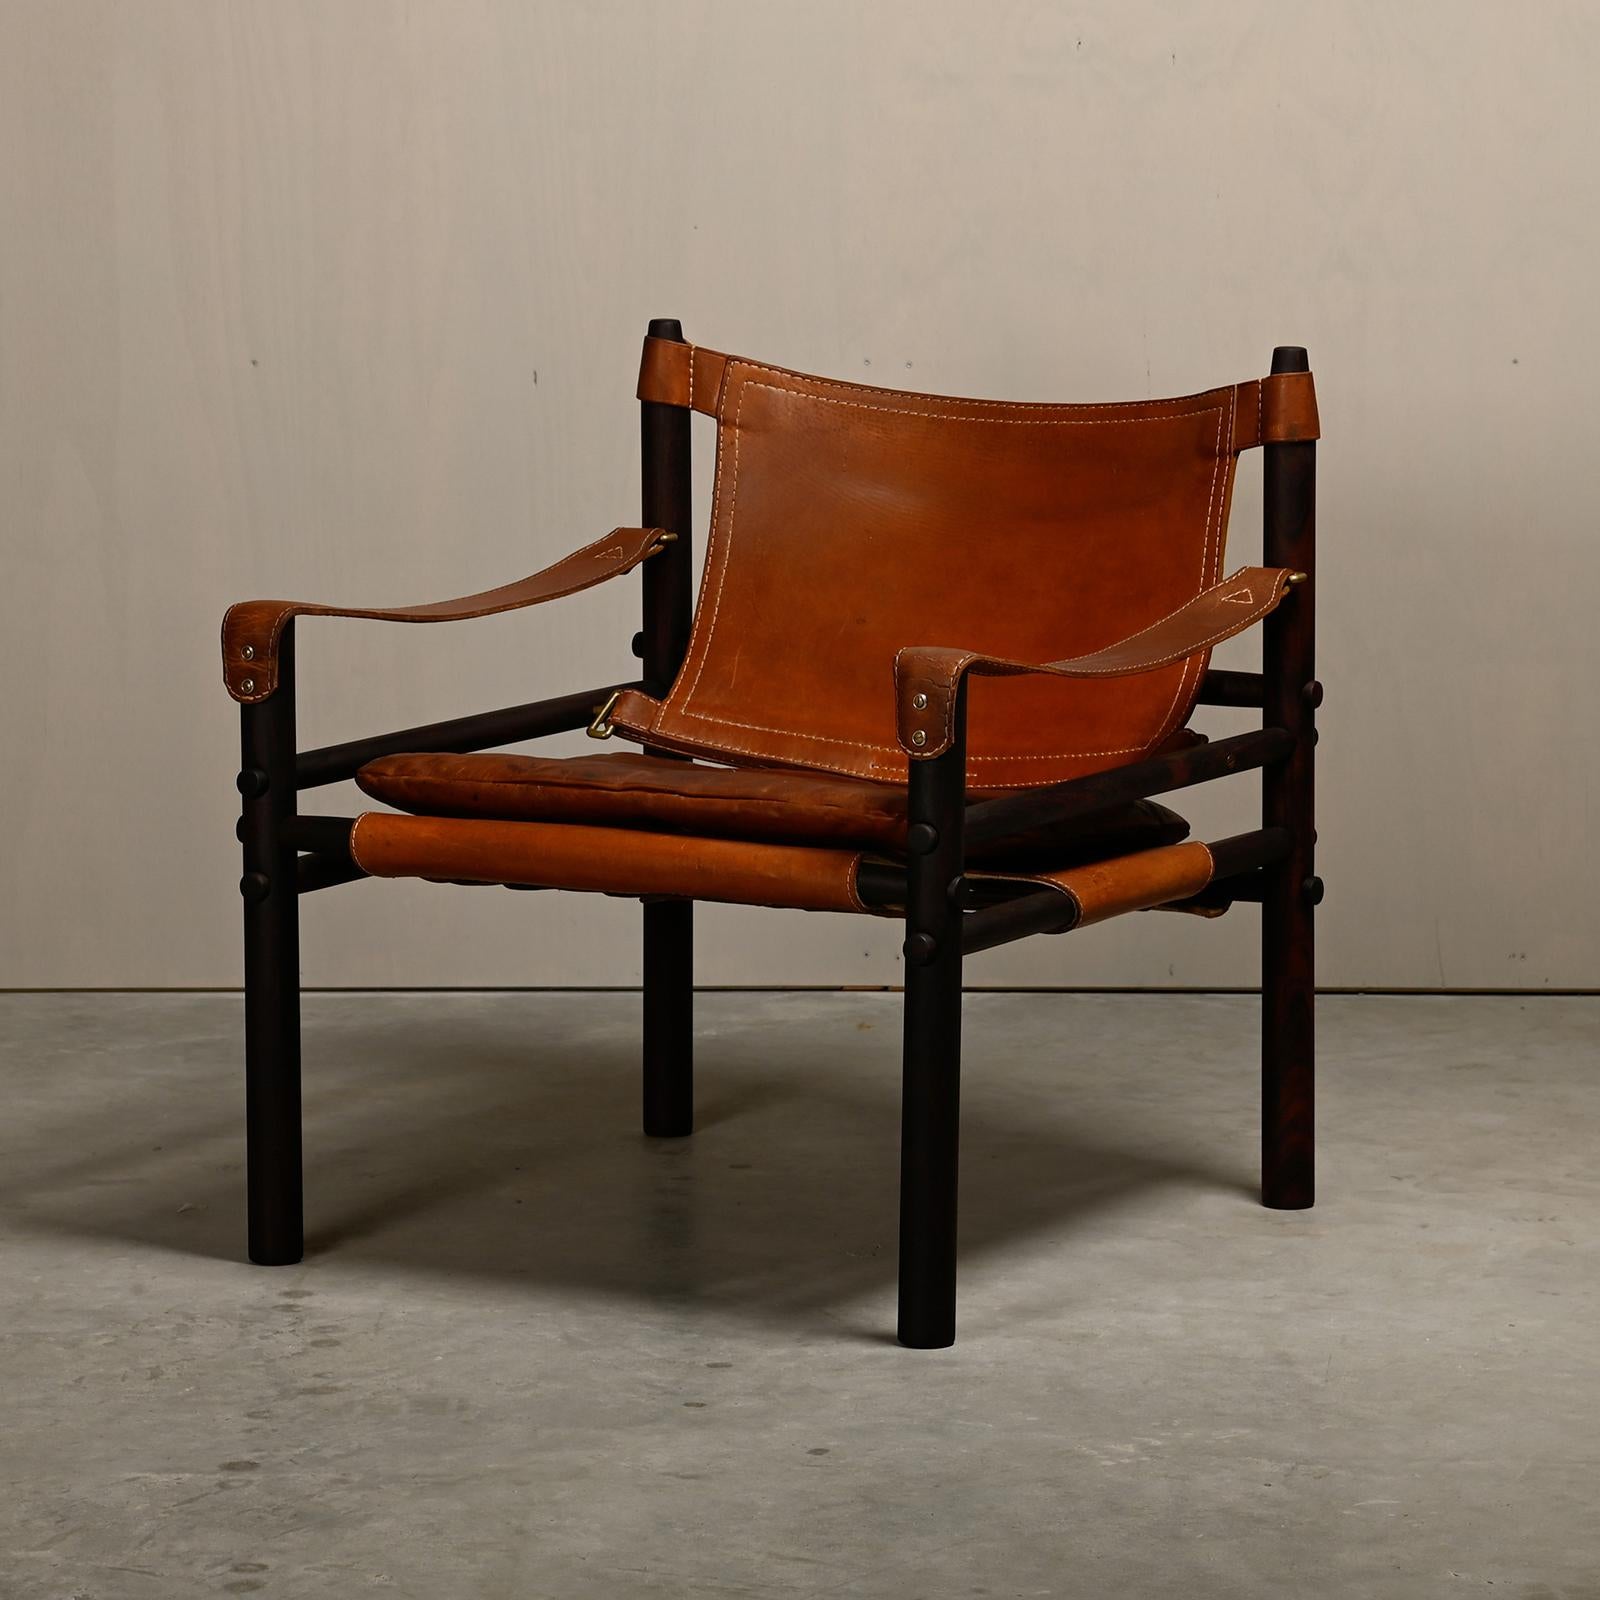 Sirocco Safari Lounge Chair designed by Arne Norell and manufactured by Norell Möbel AB in Sweden. Refinished dark brown rosewood frame with the original leather cushions in beautiful aged brown leather. All in good vintage condition.